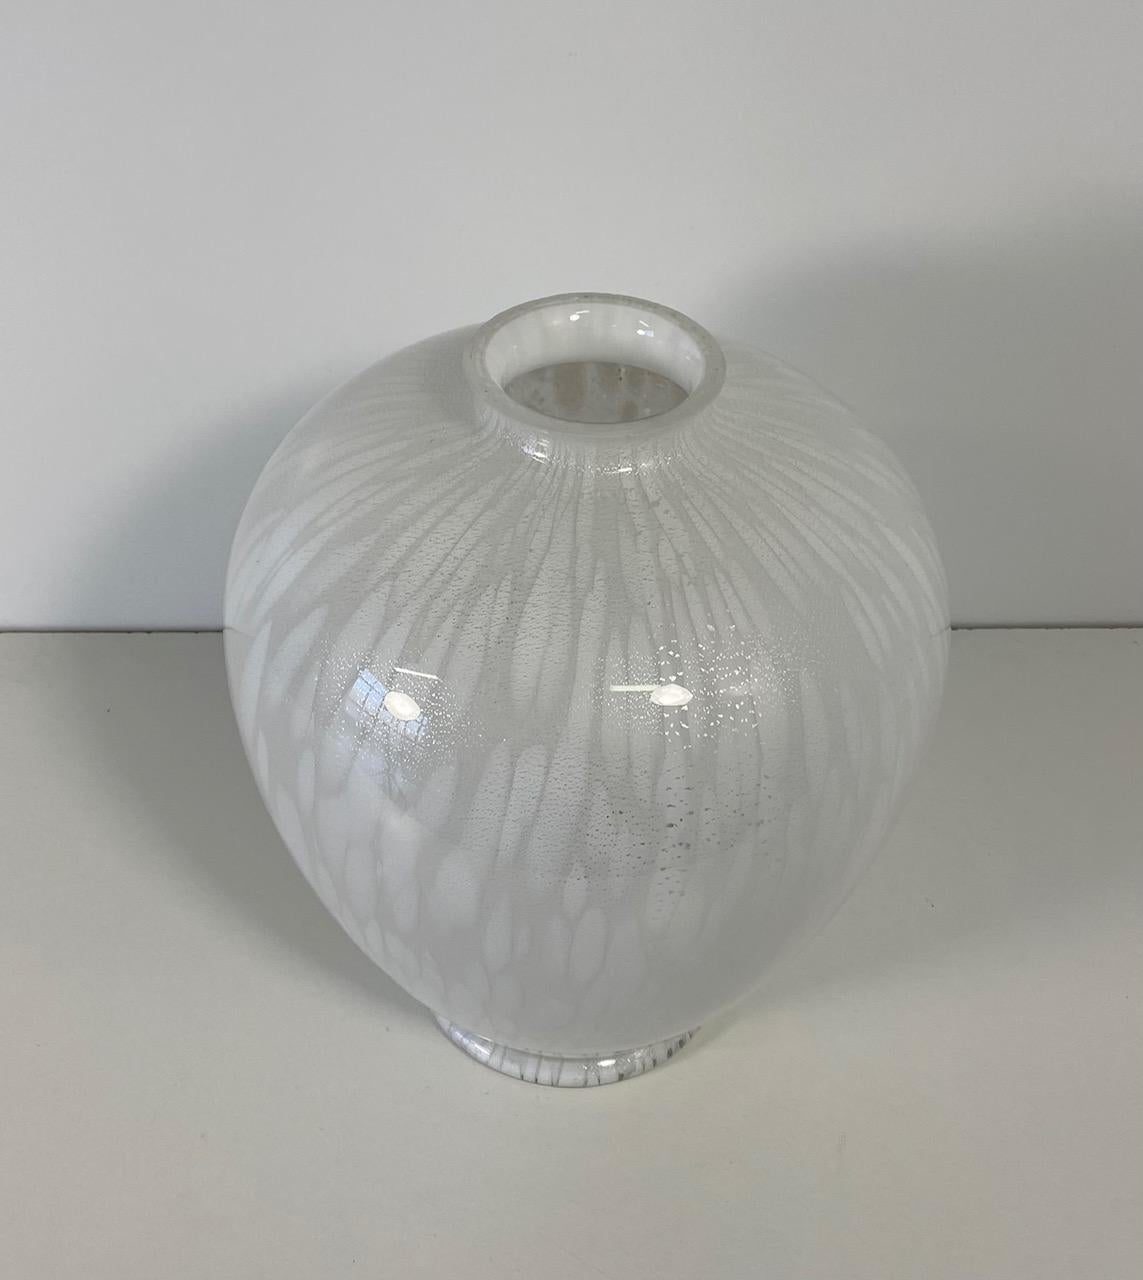 This elegant vase was produced in Murano, Venice (Italy) by master glass artists. 

The vase features different shades of white created using particular glass processing techniques and numerous silver inclusions.
 